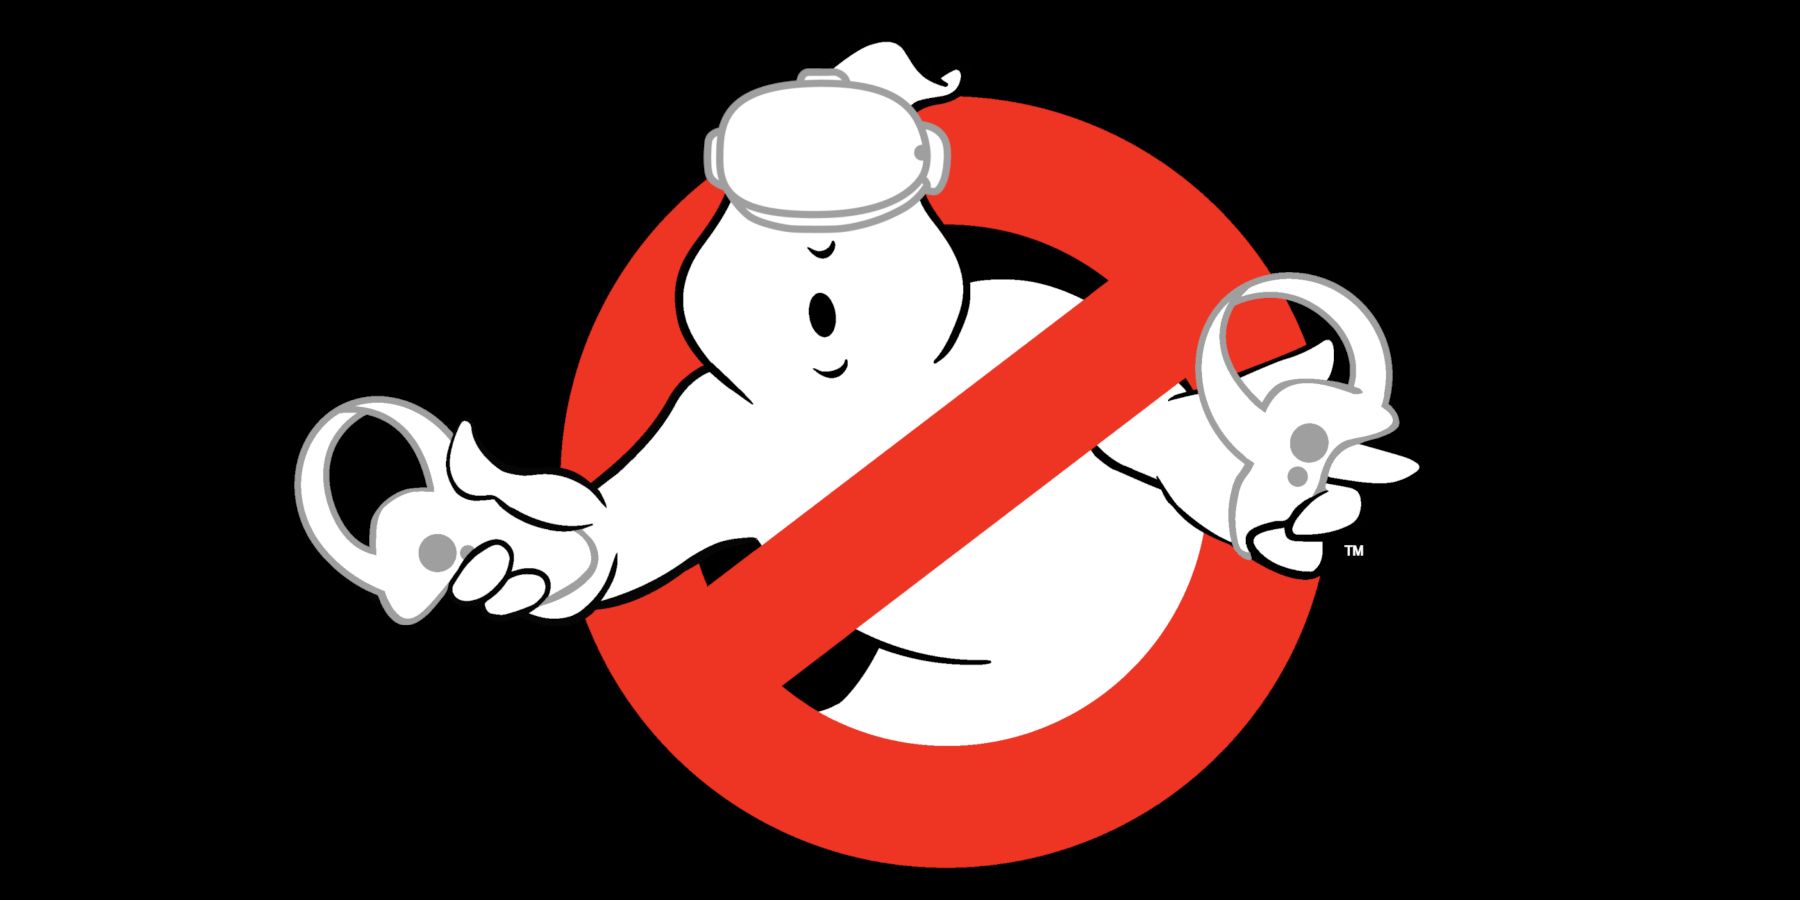 Ghostbusters VR Game Announced